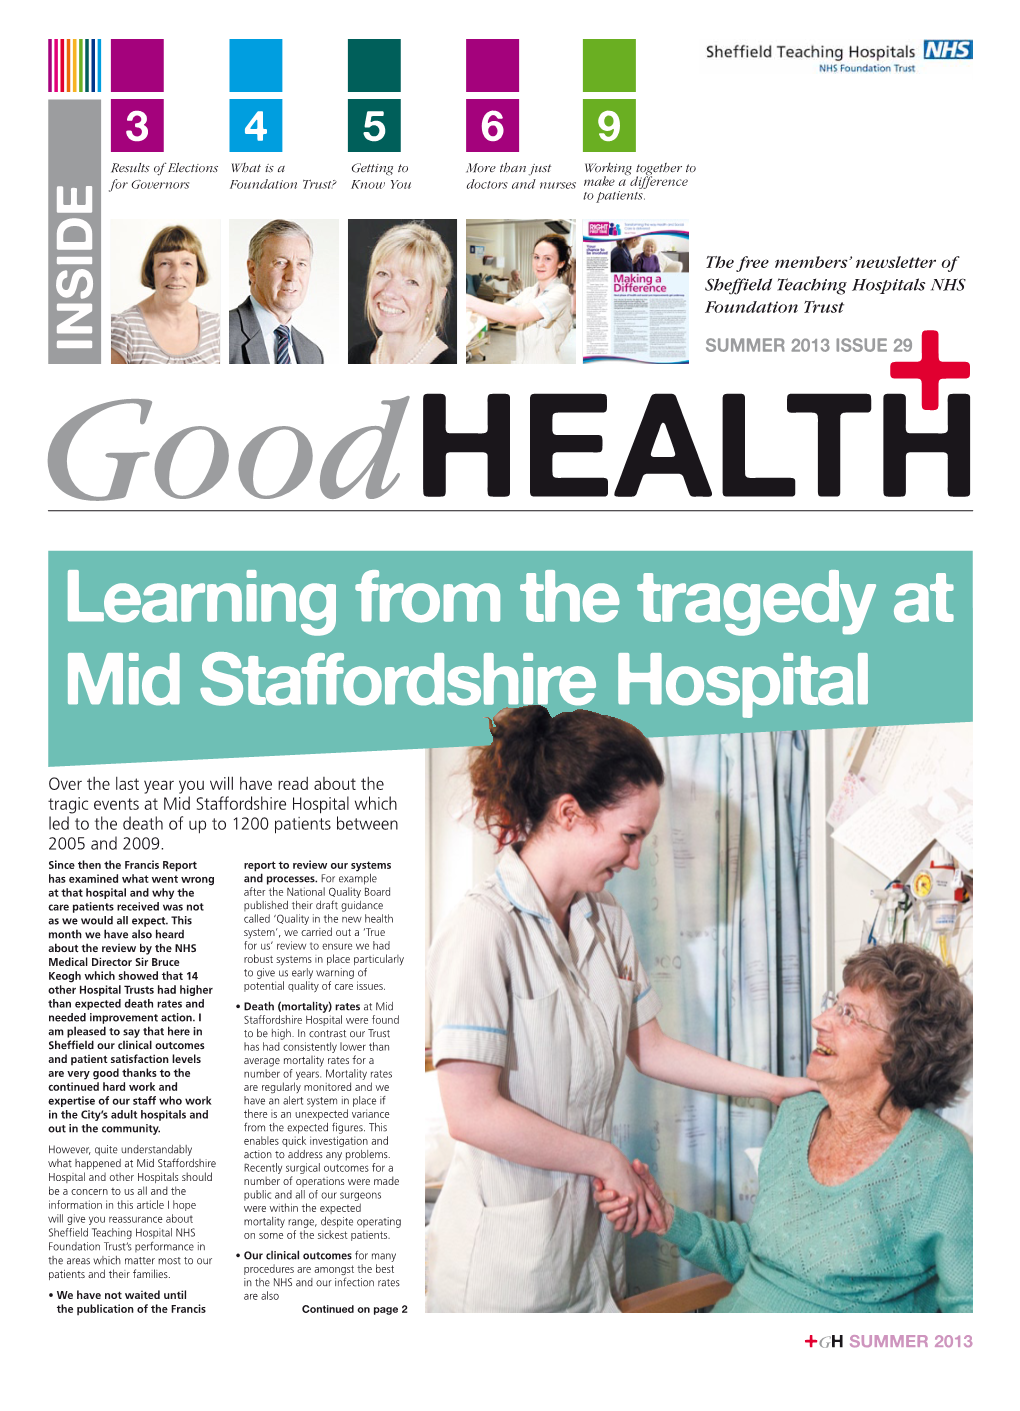 Learning from the Tragedy at Mid Staffordshire Hospital